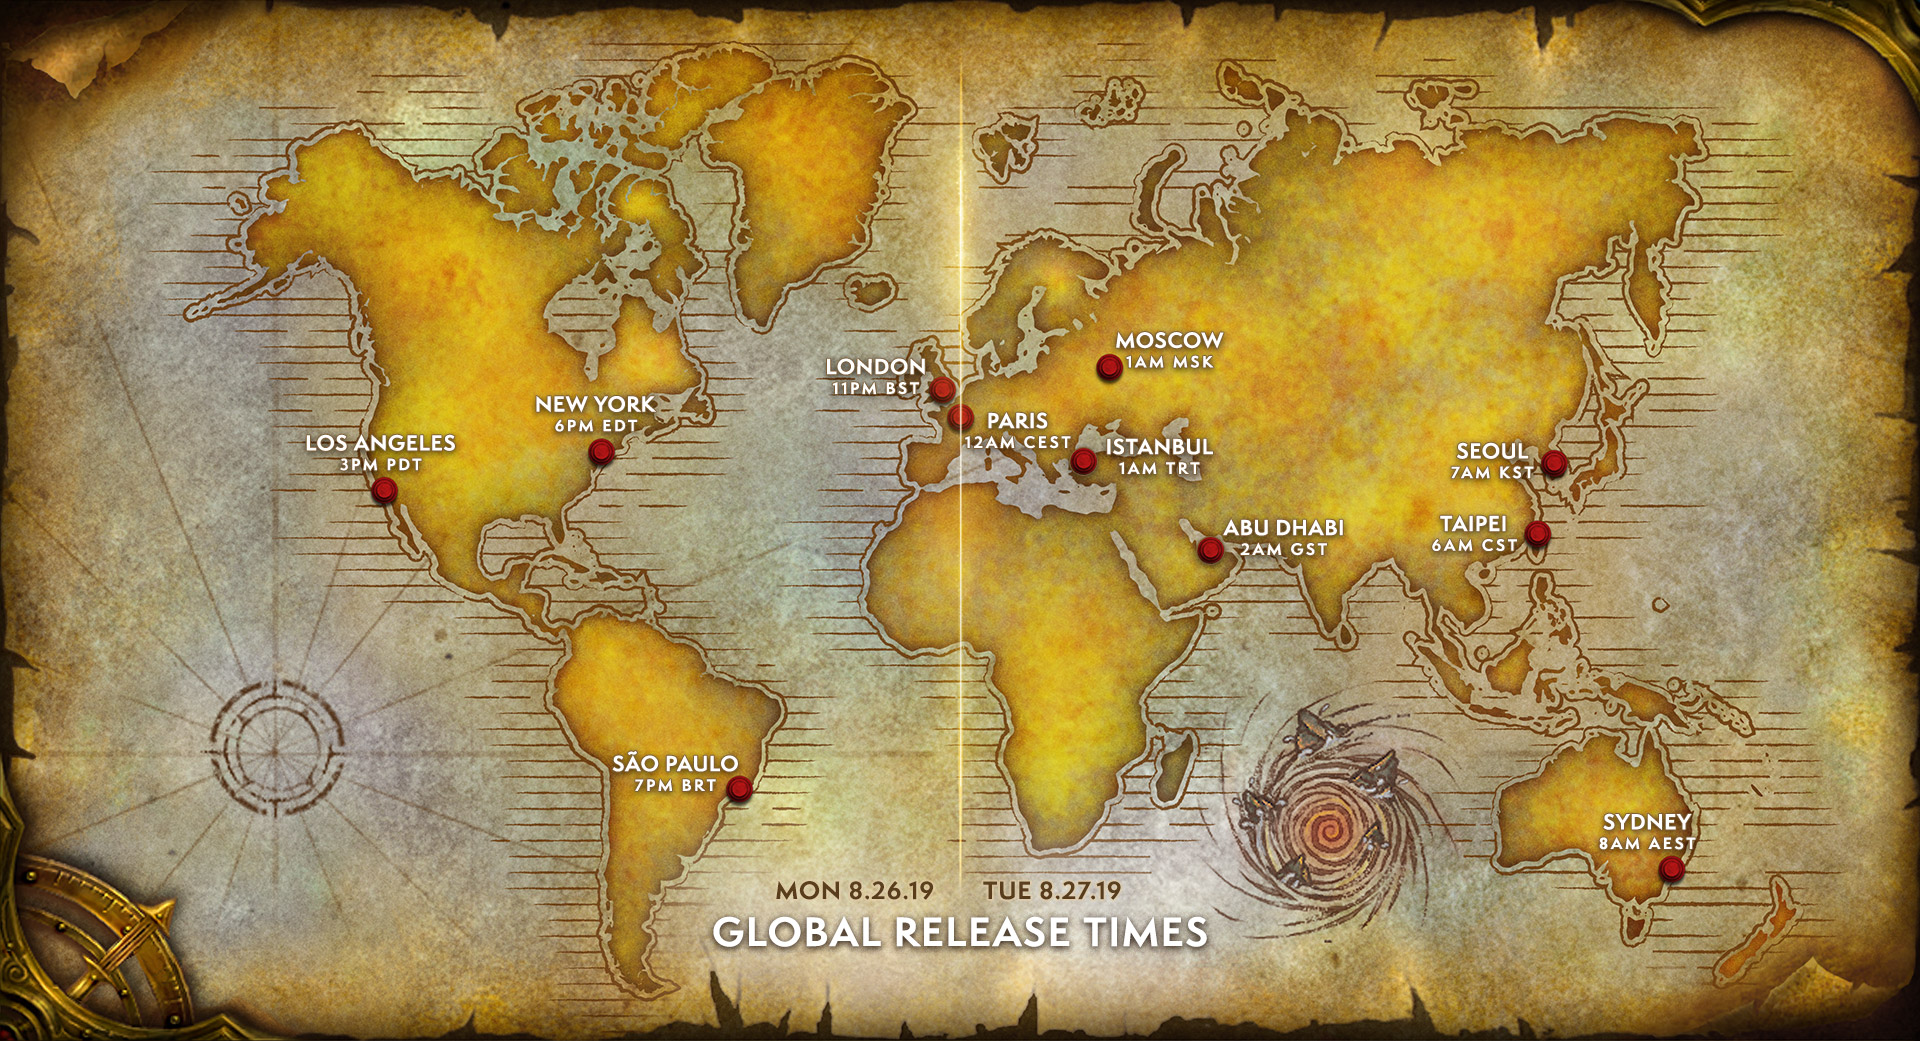 WoW Classic Release Map